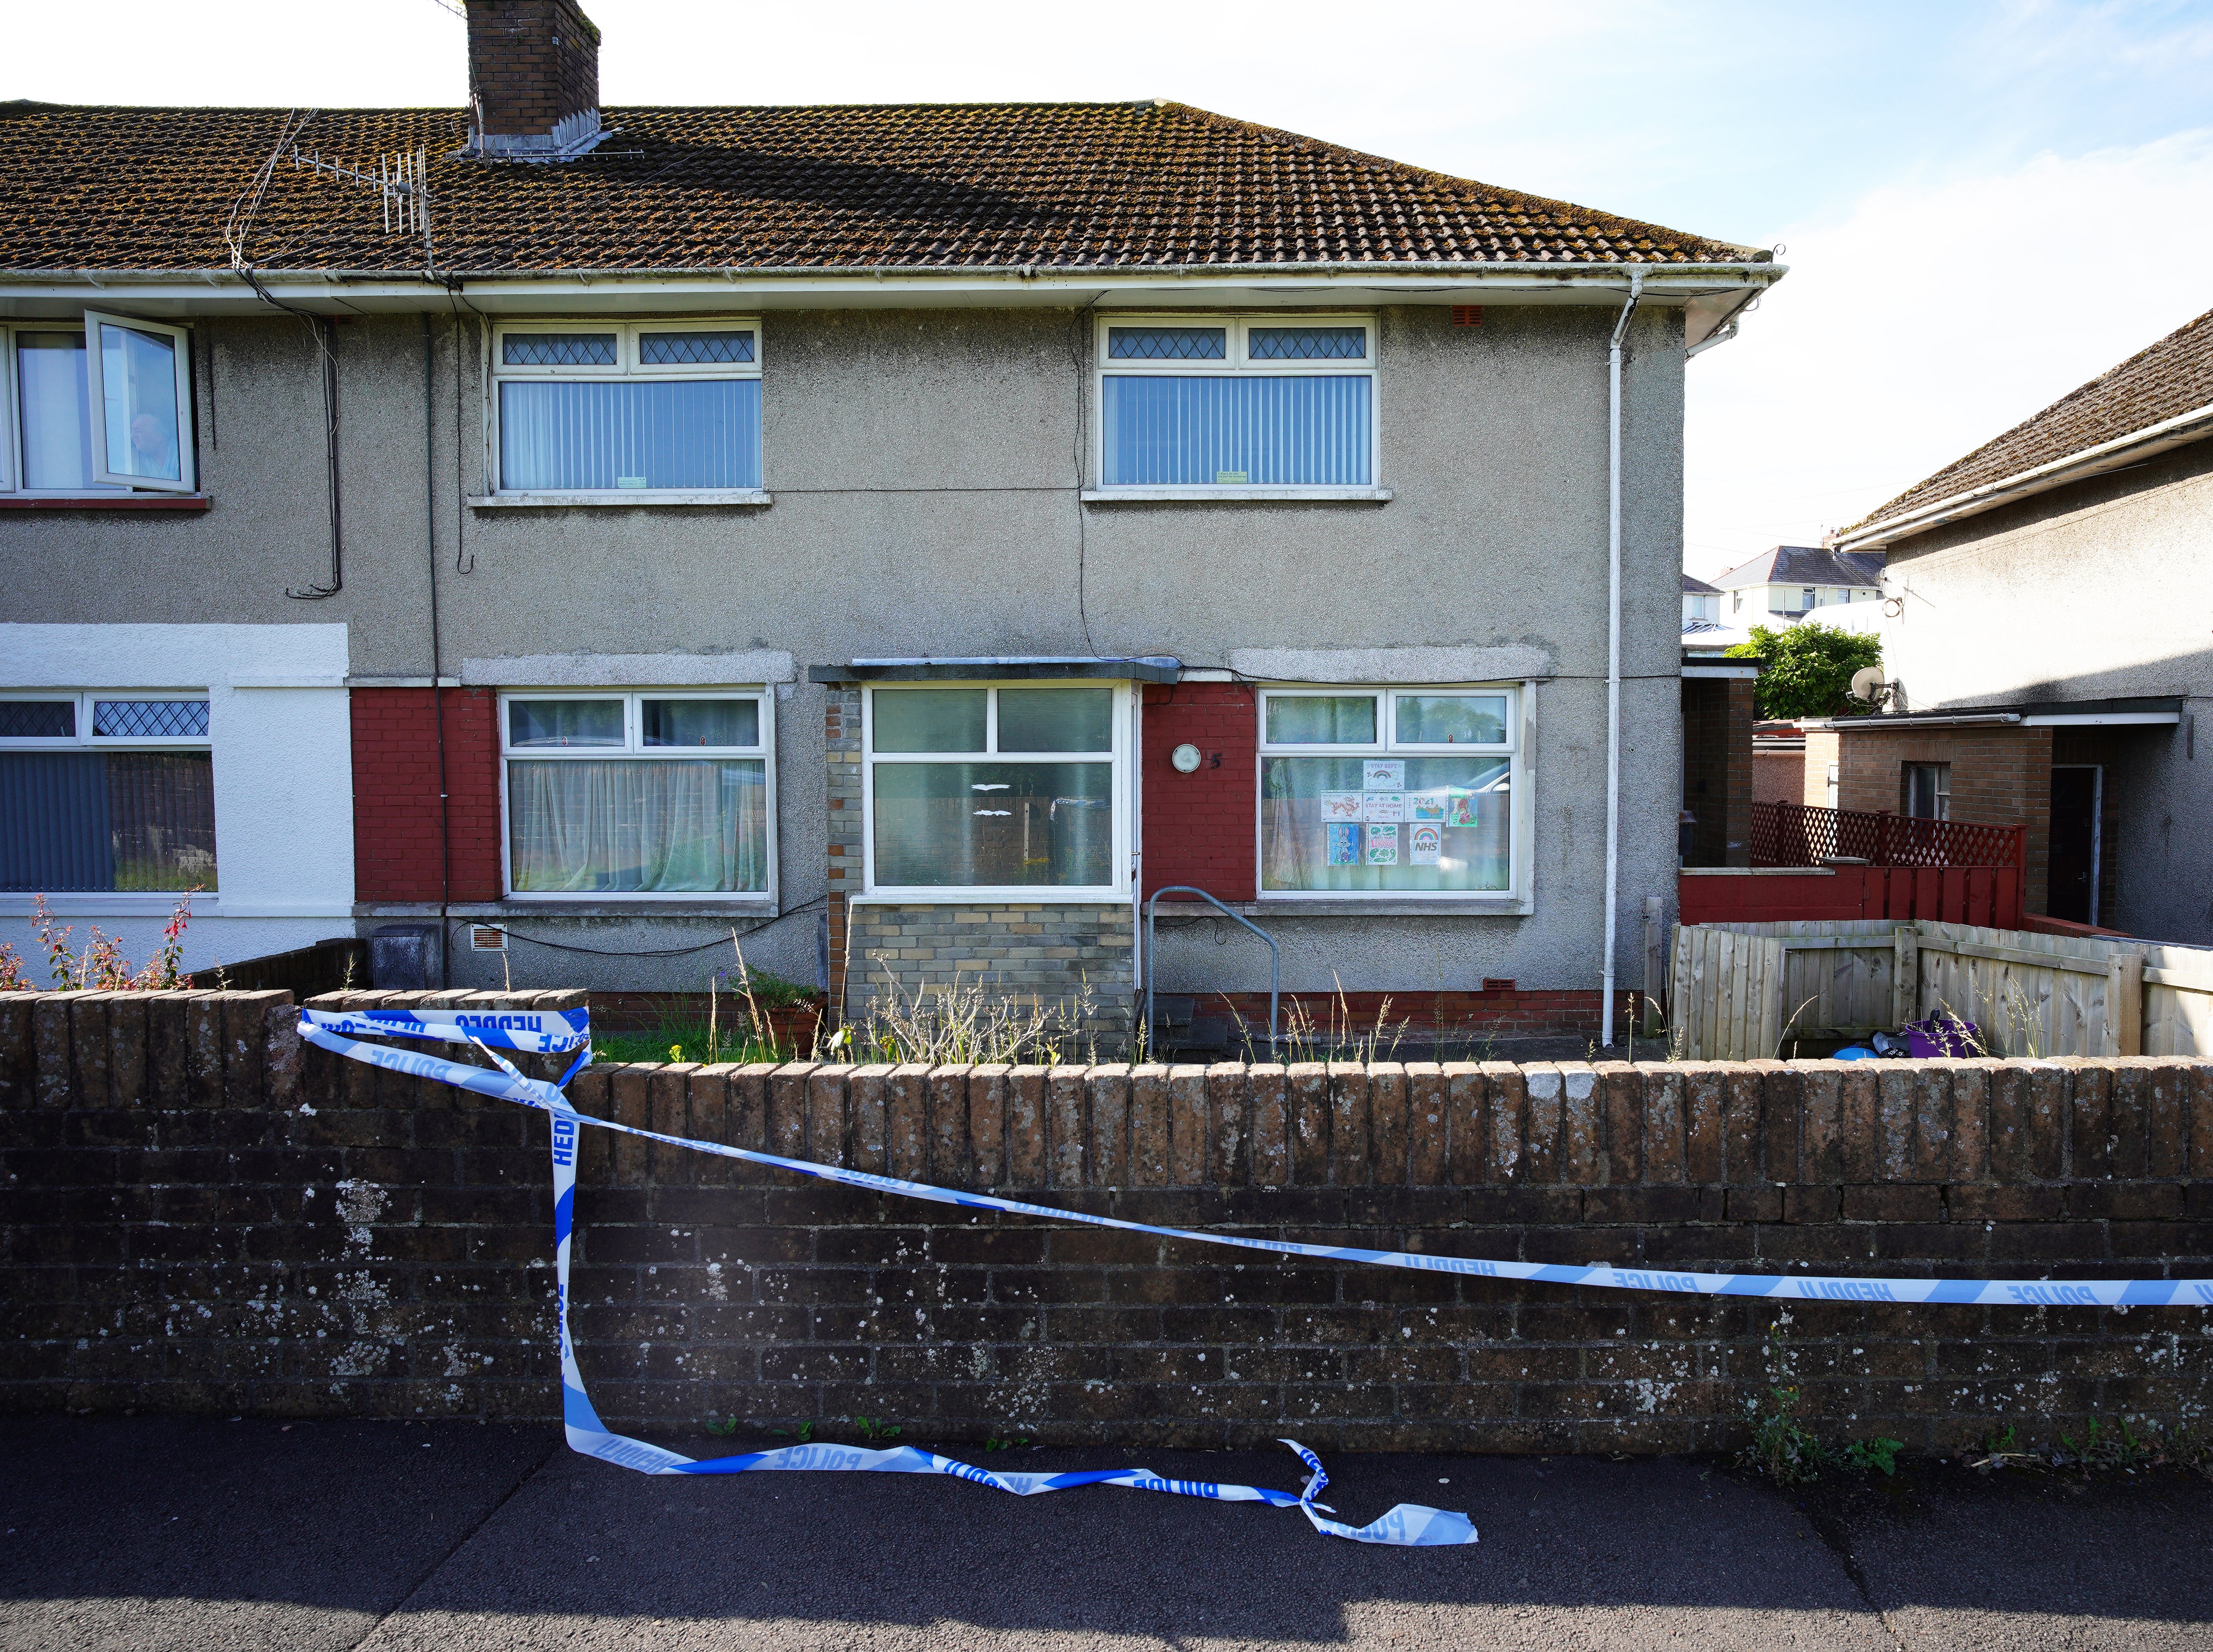 Police tape at a property in the Sarn area of Bridgend, south Wales, near to where five-year-old Logan Mwangi was found dead in the Ogmore River